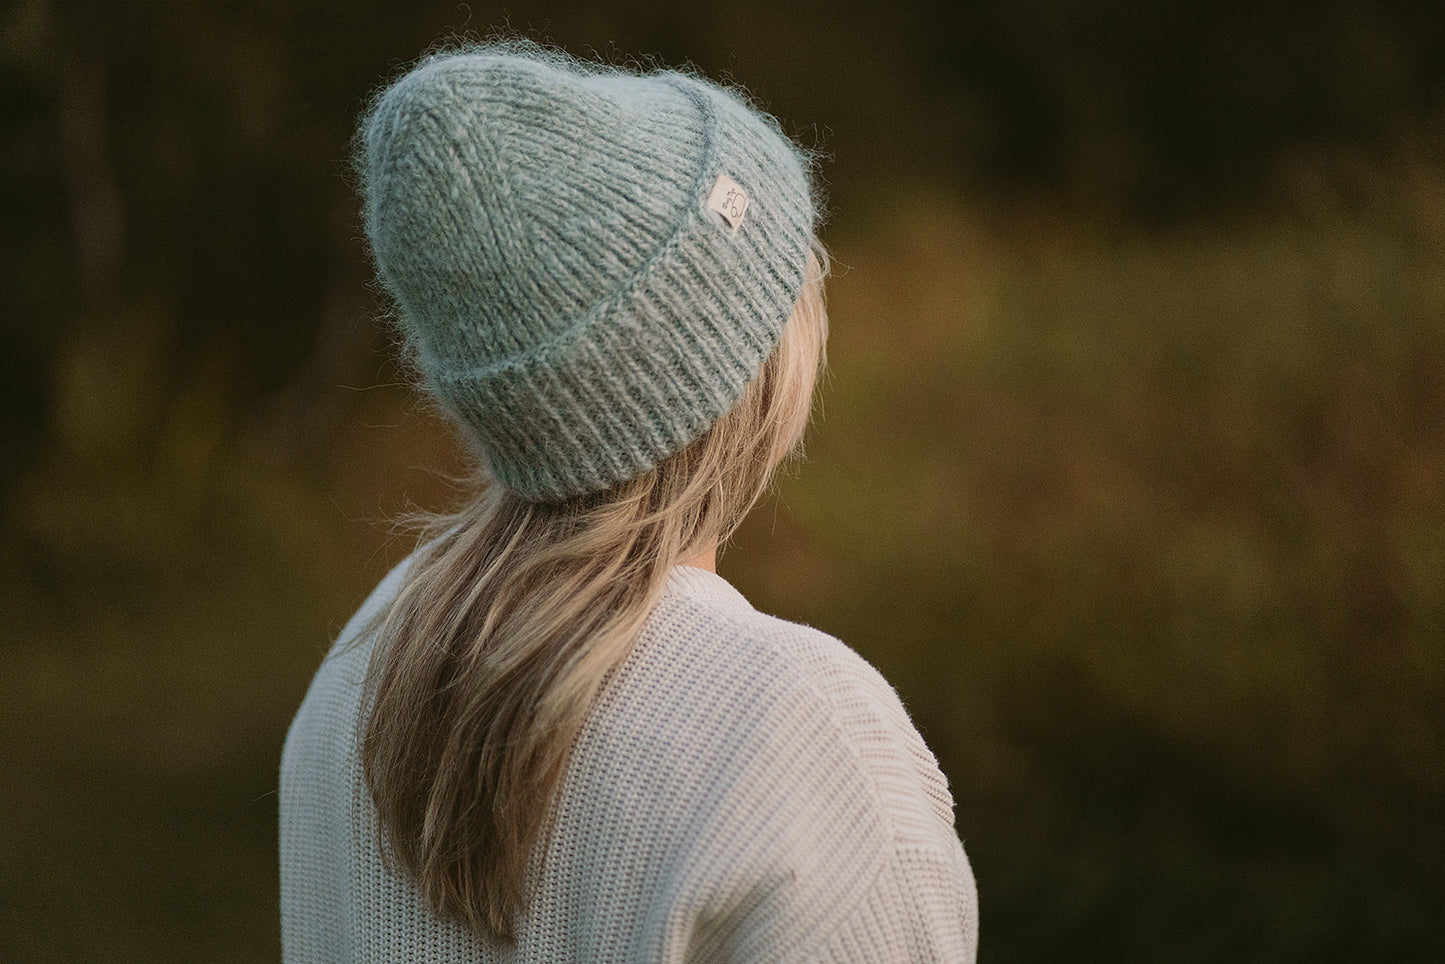 A girl standing back on wearing the hand-knitted wooly top hat in green.